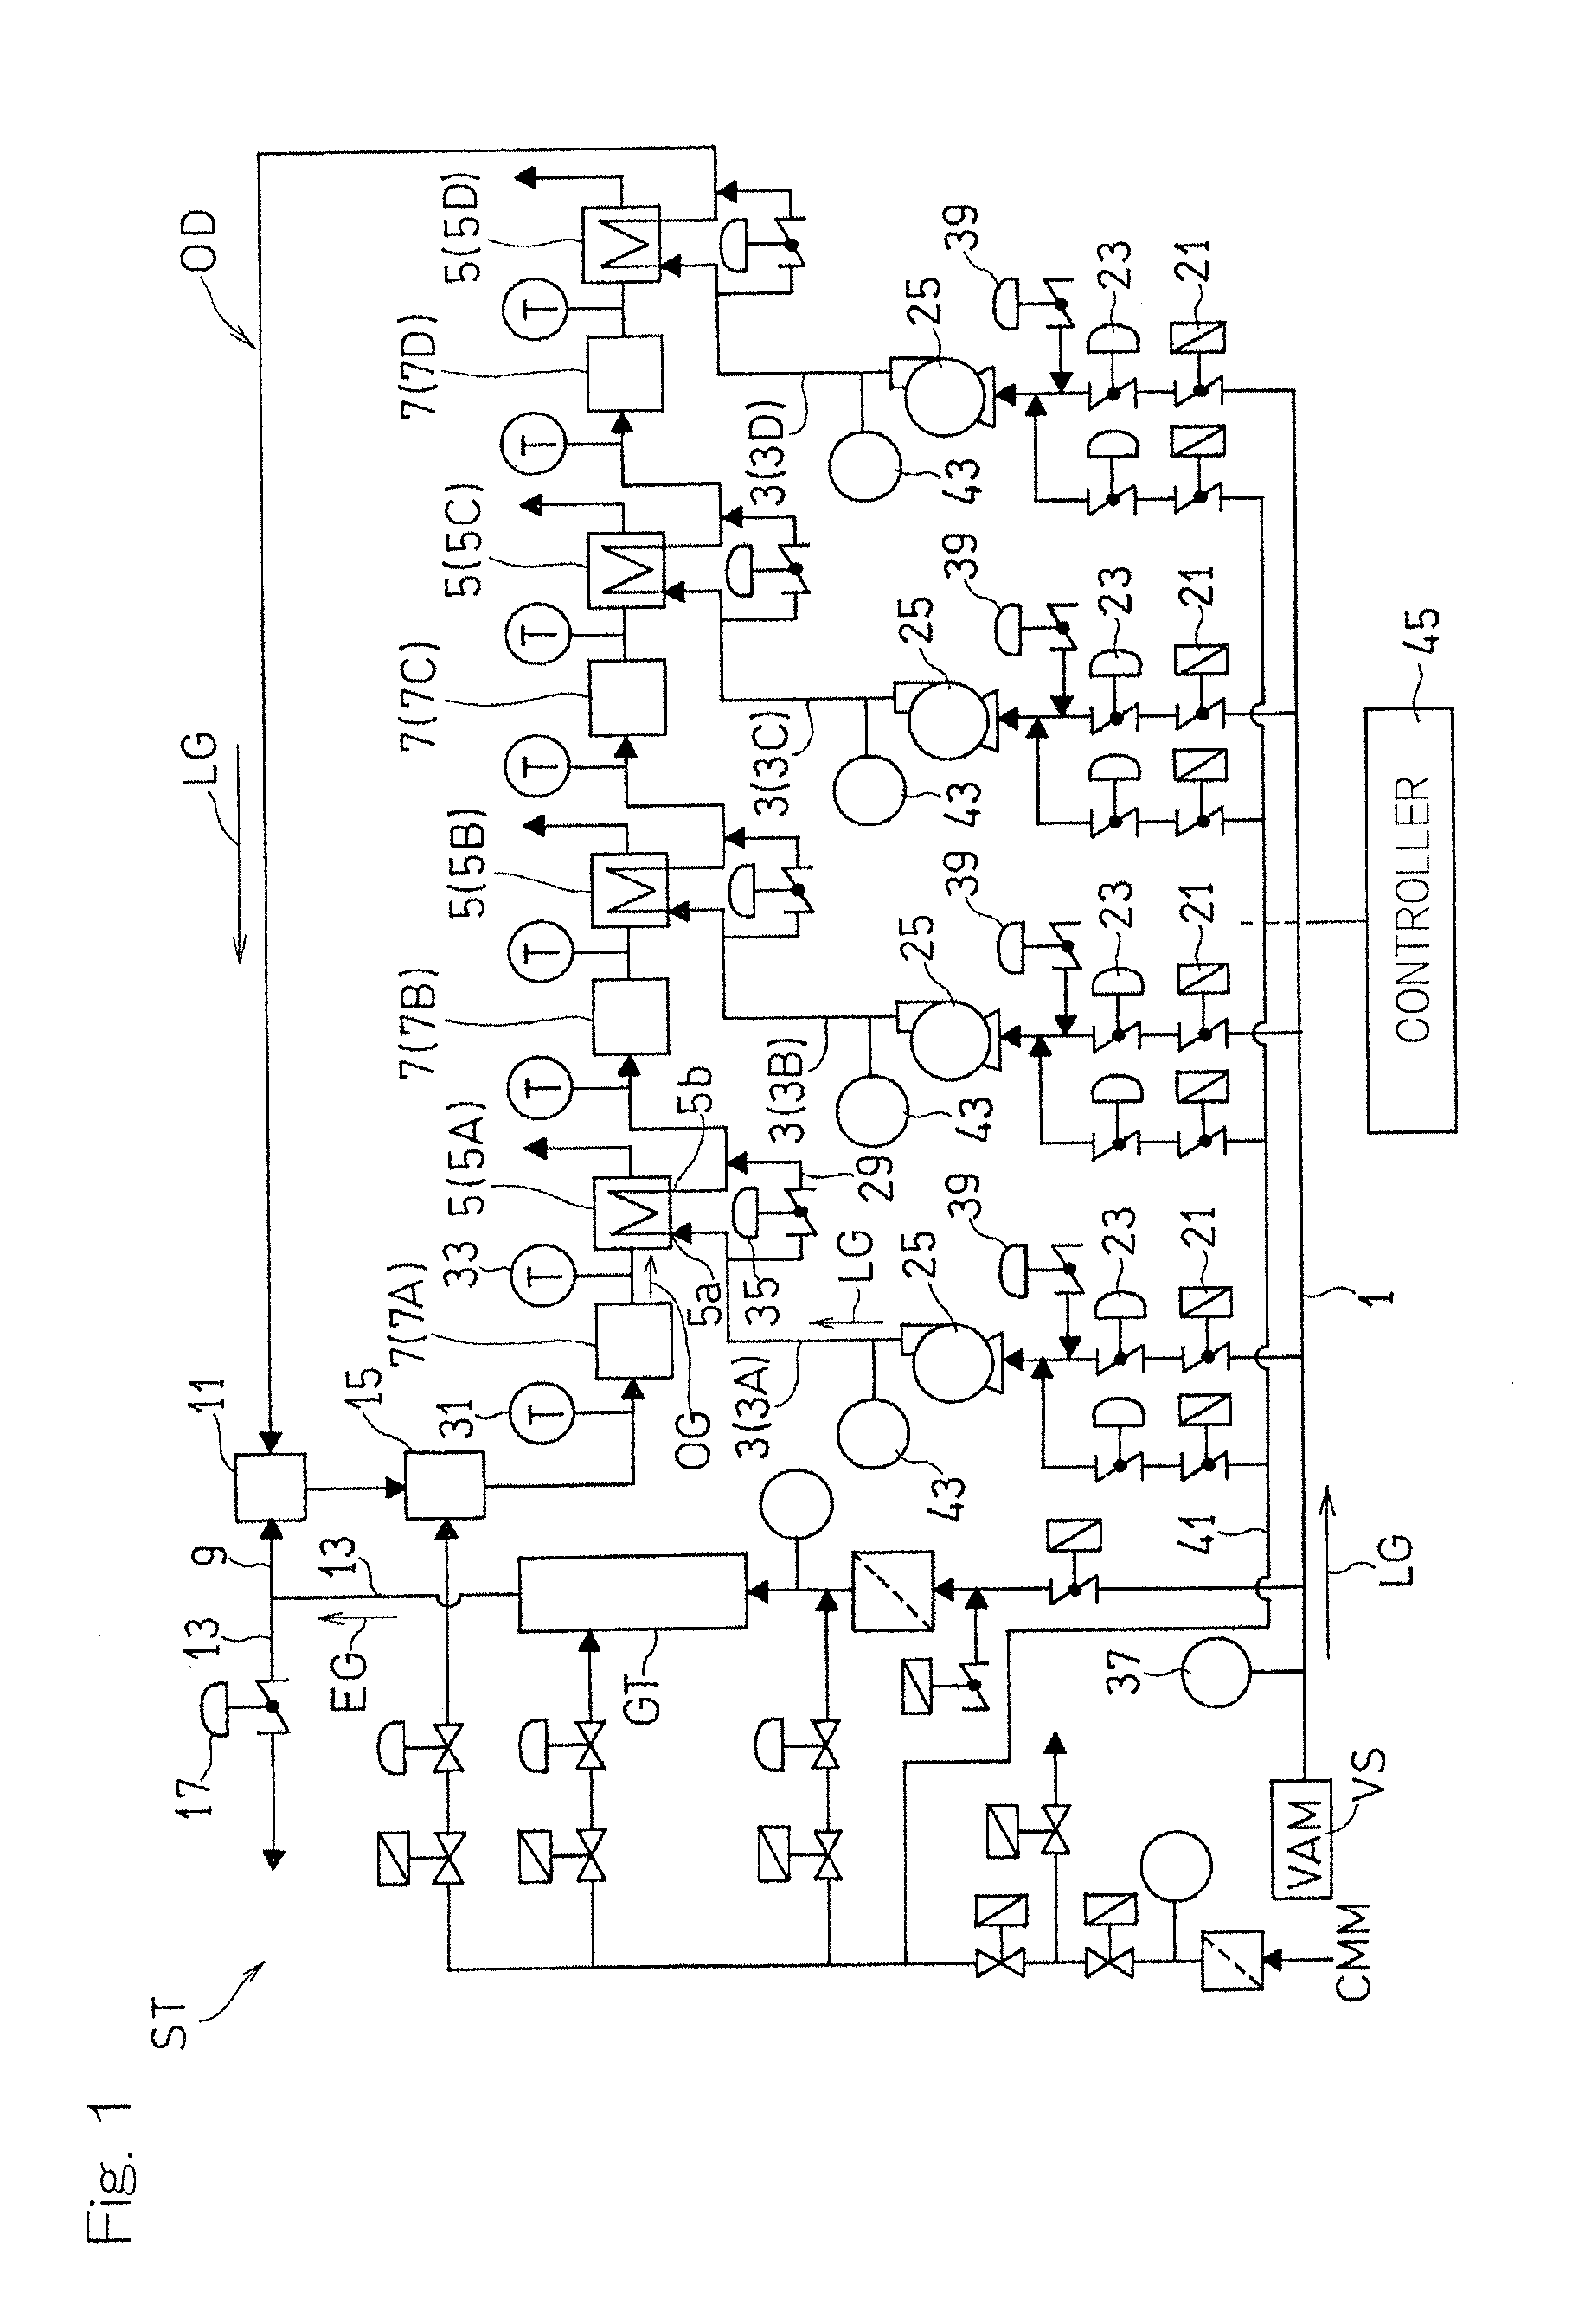 System for low-concentration-methane gas oxidation equipped with multiple oxidizers